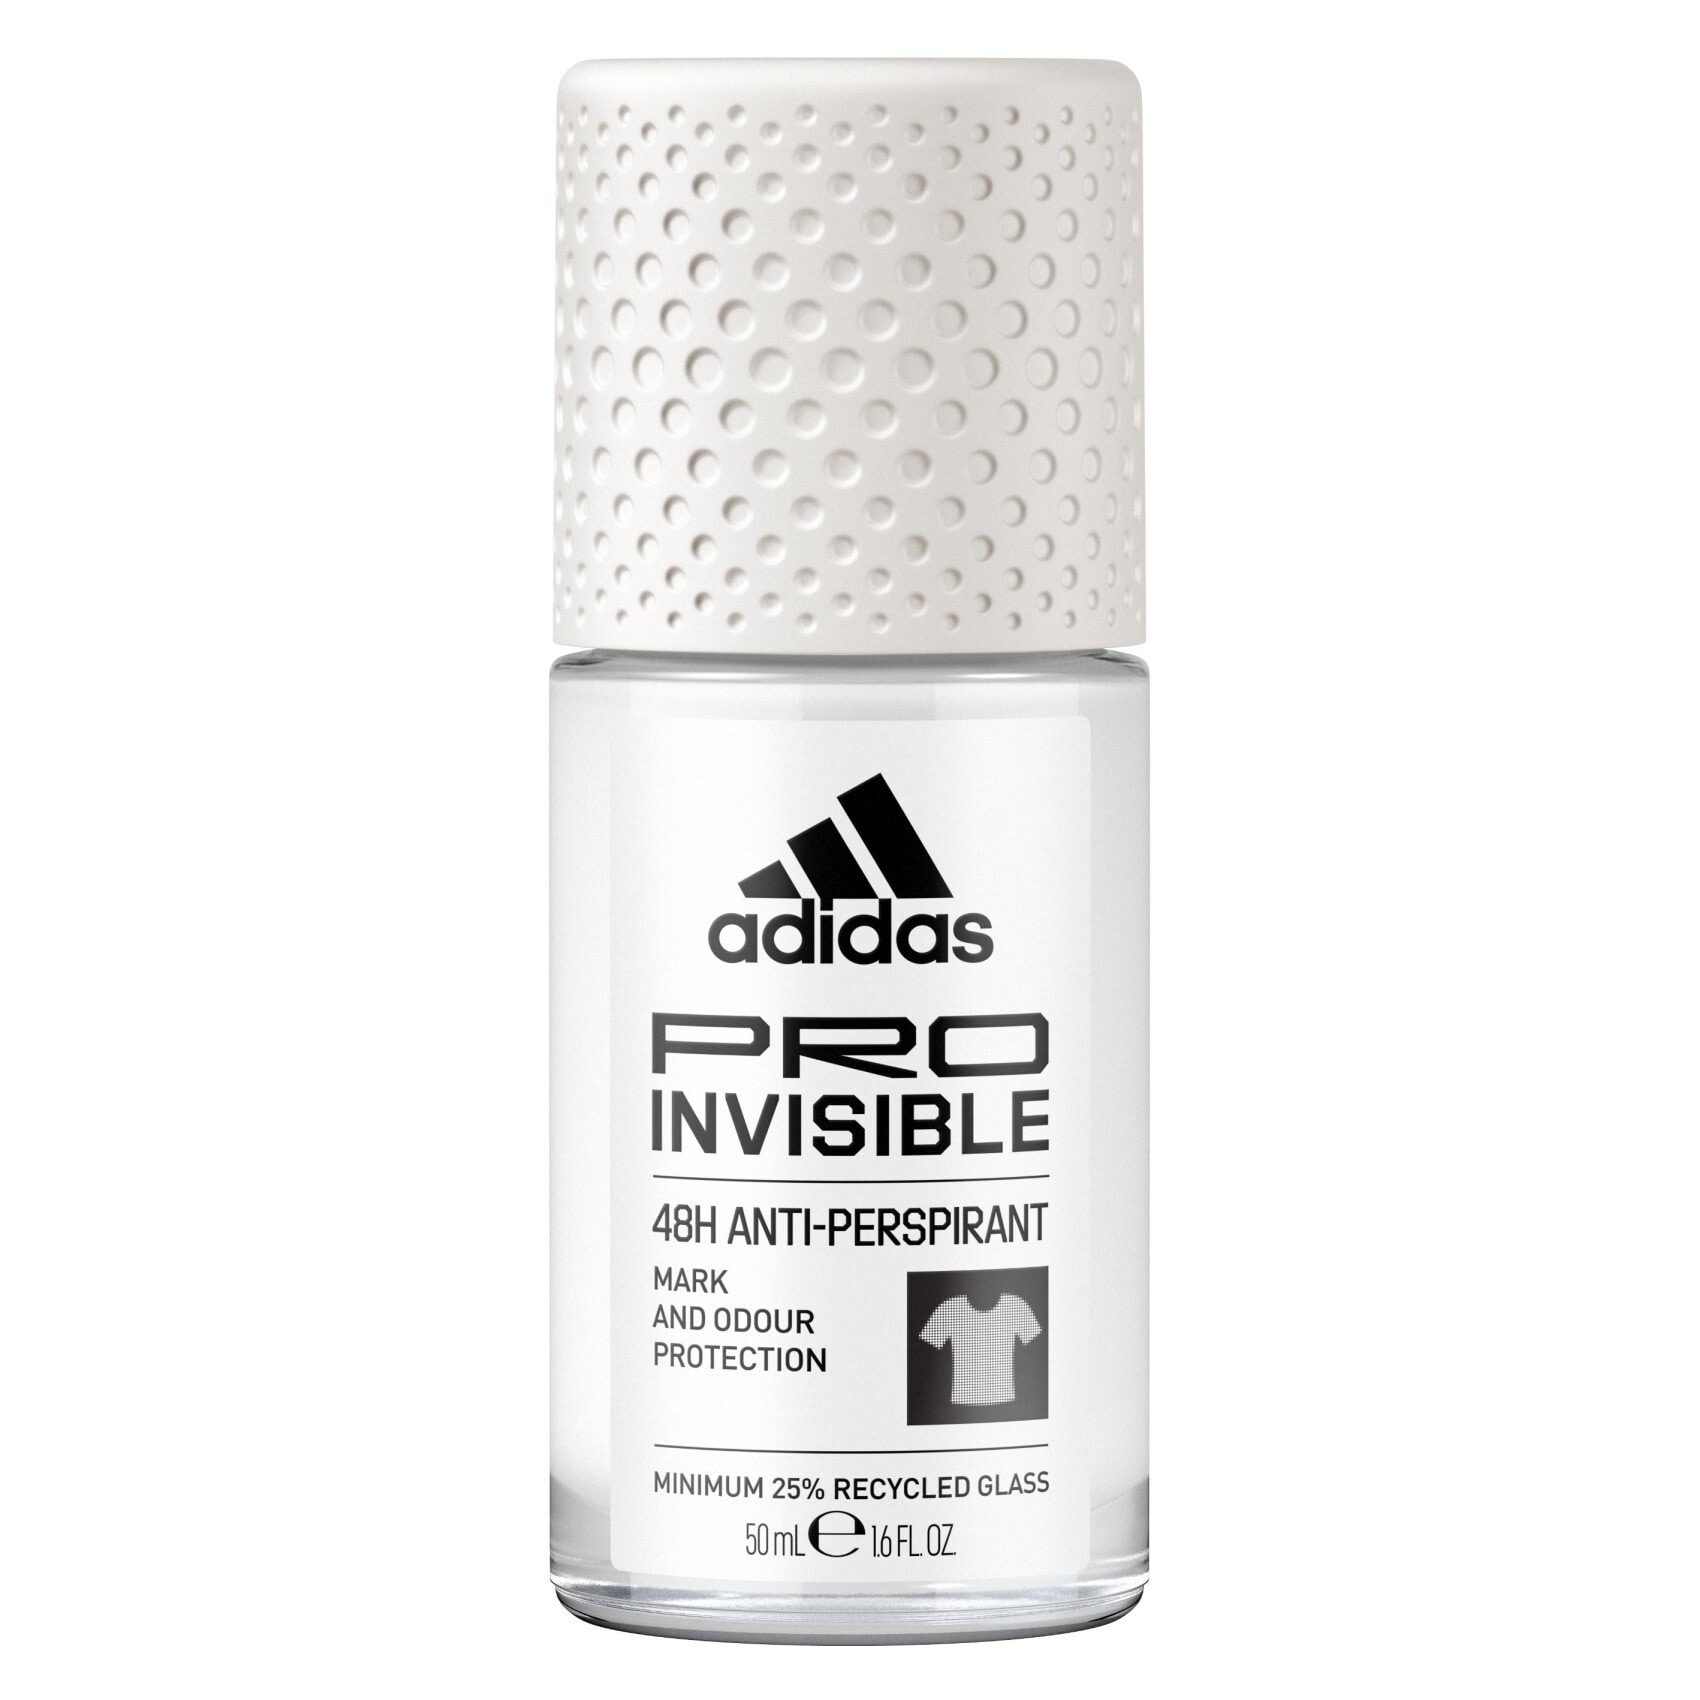 Buy Adidas Pro Invisible 48H Anti-Perspirant Roll-On Clear 50ml Online - Beauty & Personal Care on Carrefour UAE